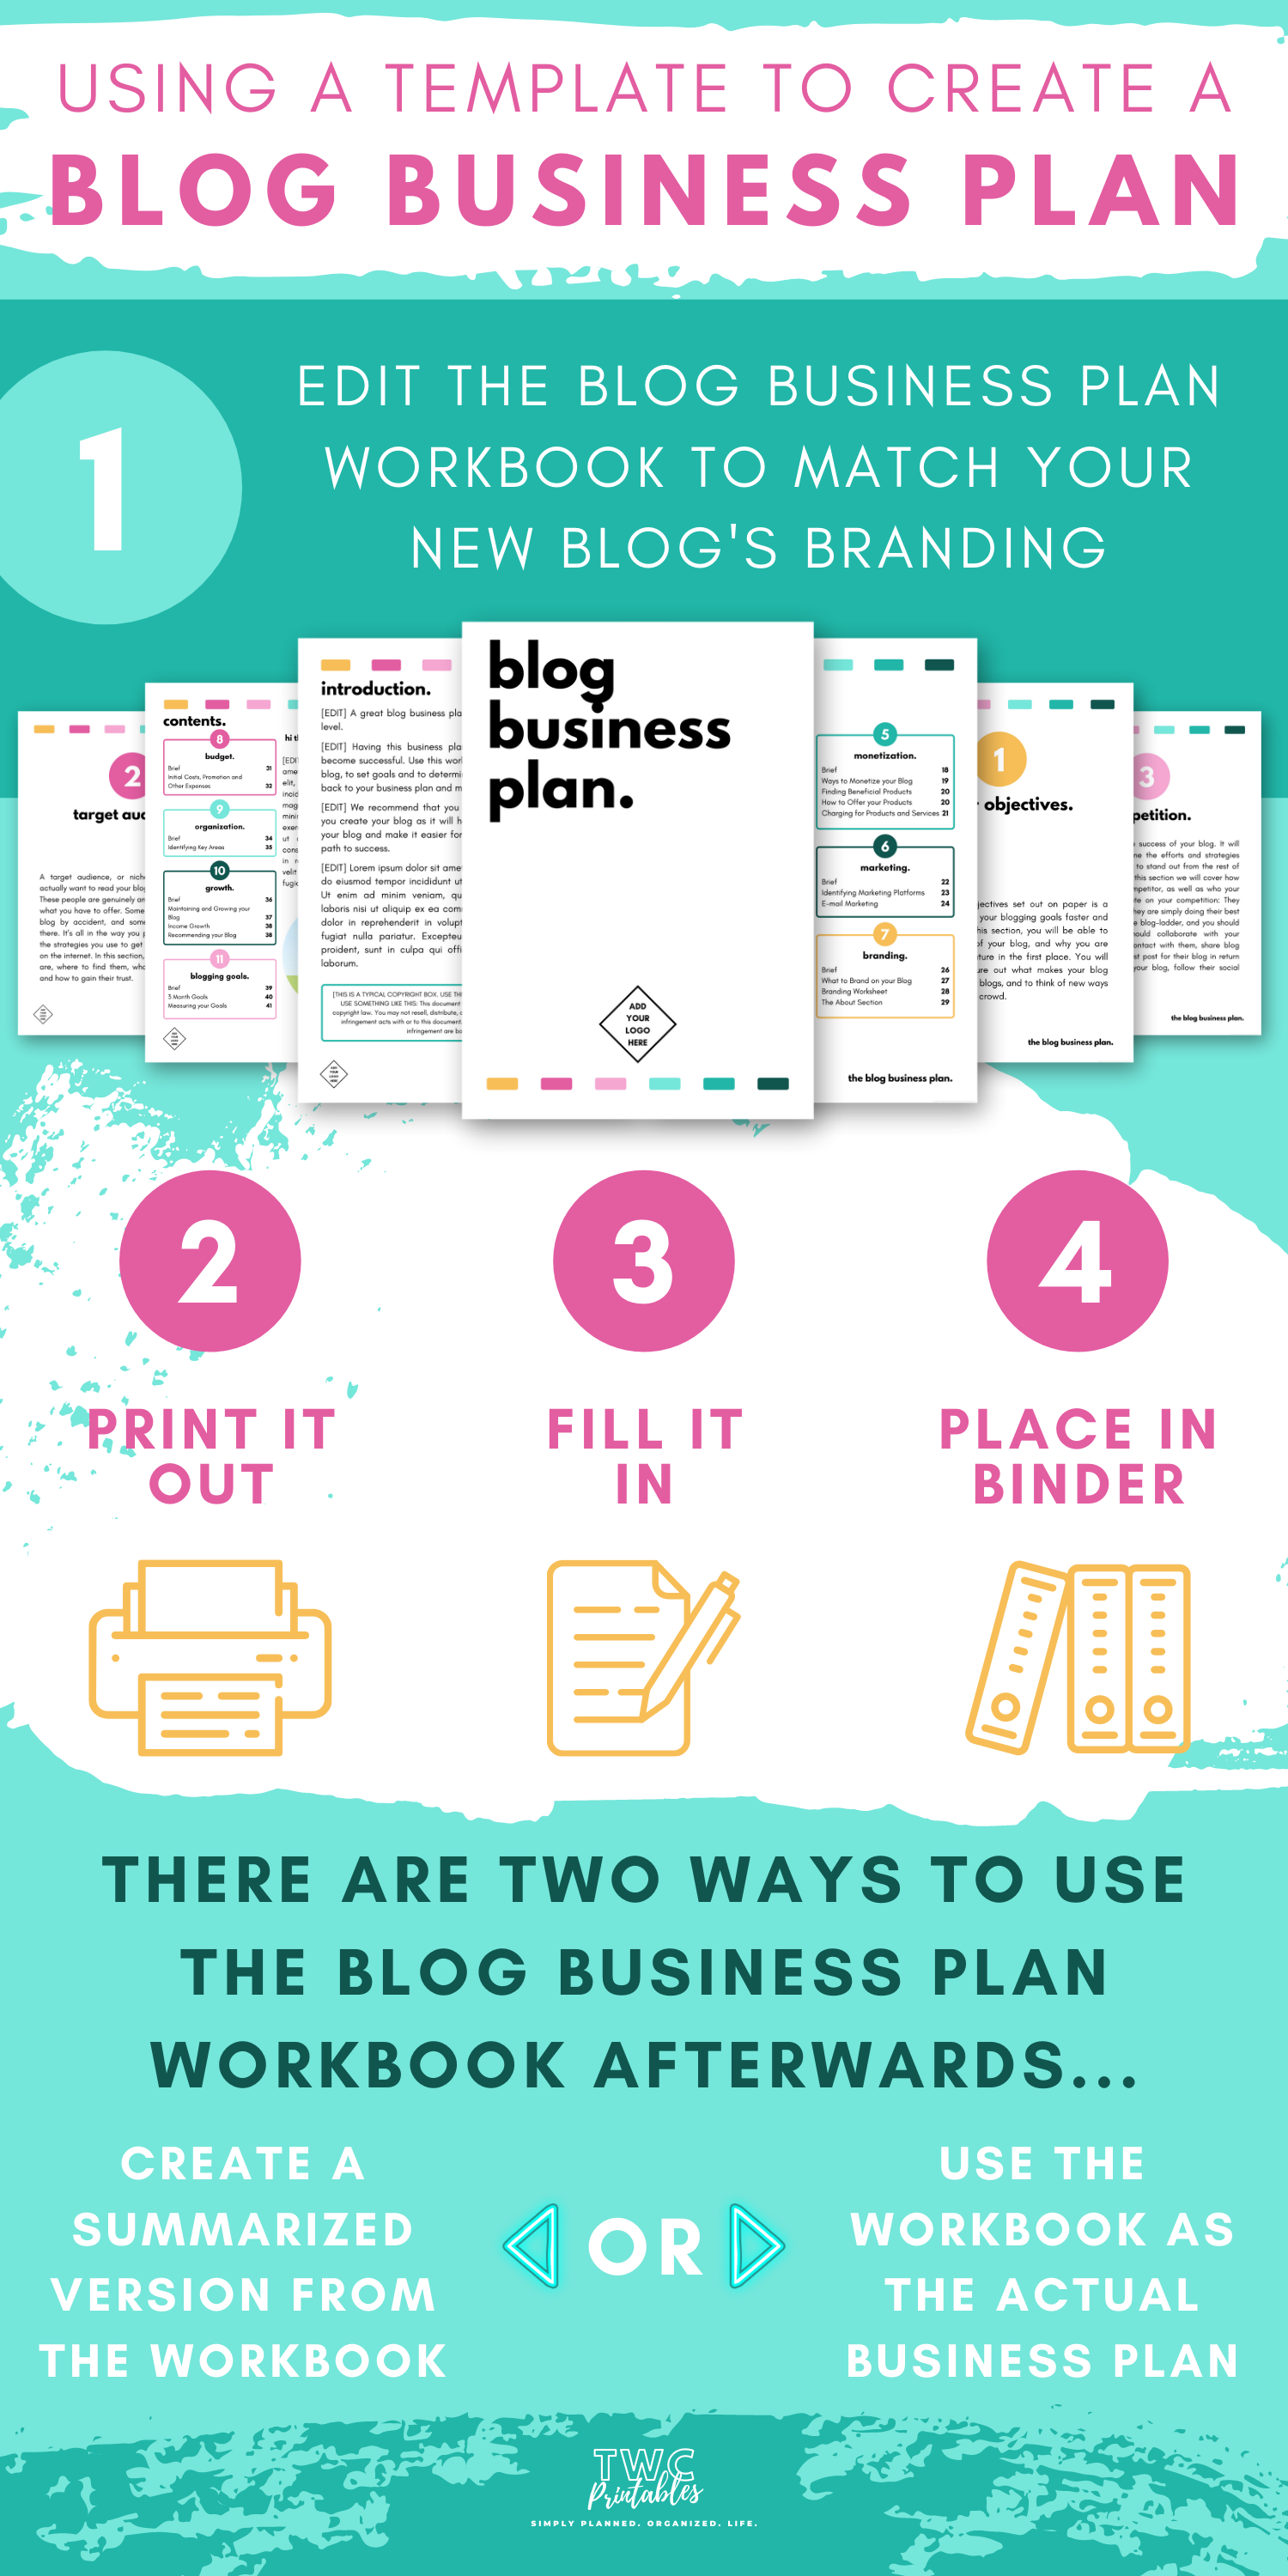 infographic - USING A TEMPLATE TO CREATE A BLOG BUSINESS PLAN-bigger